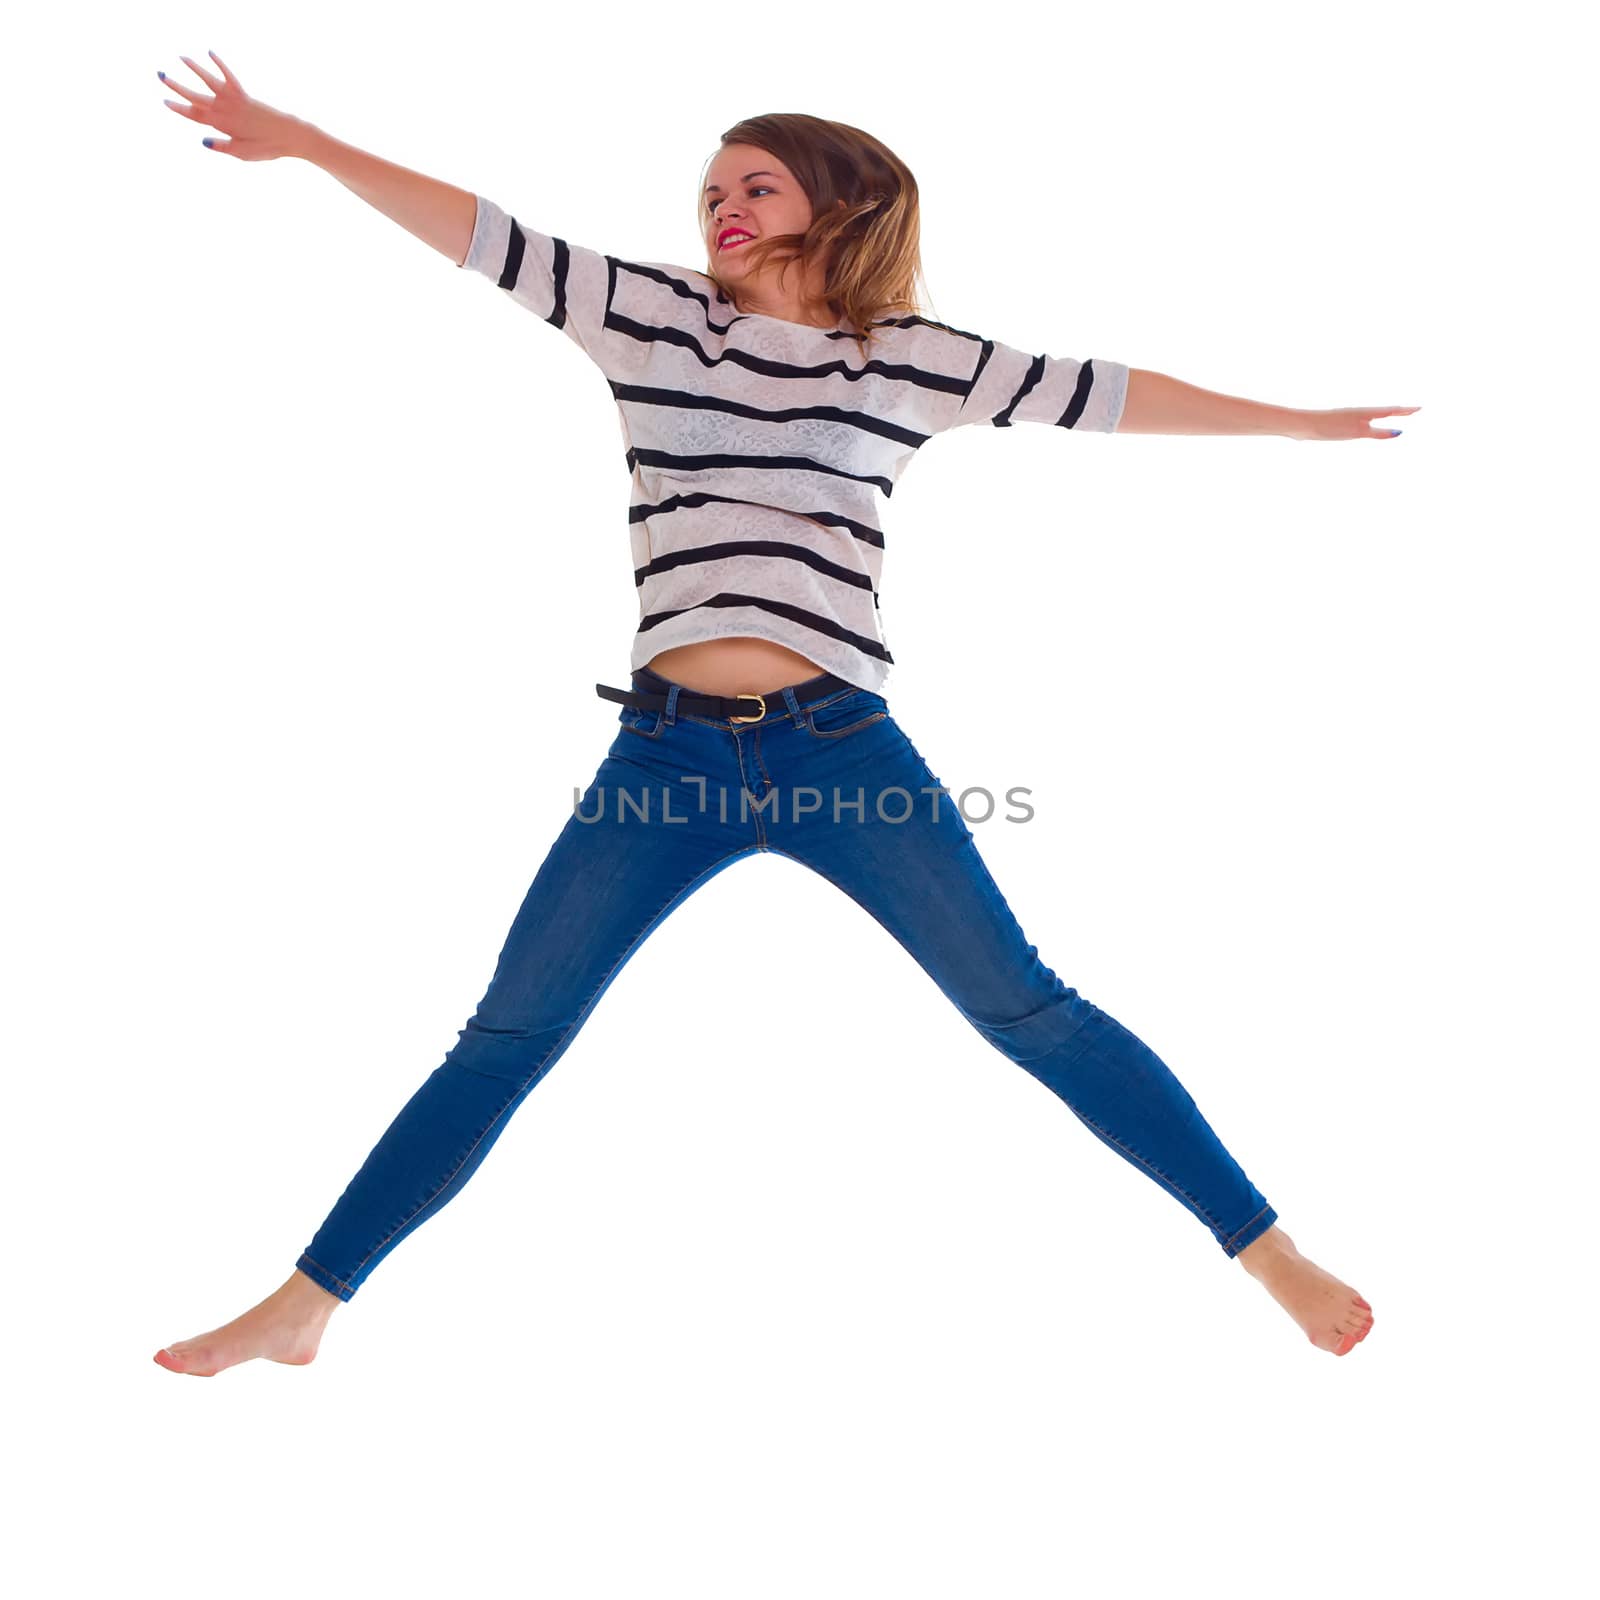 a young woman in jeans jumping. isolate